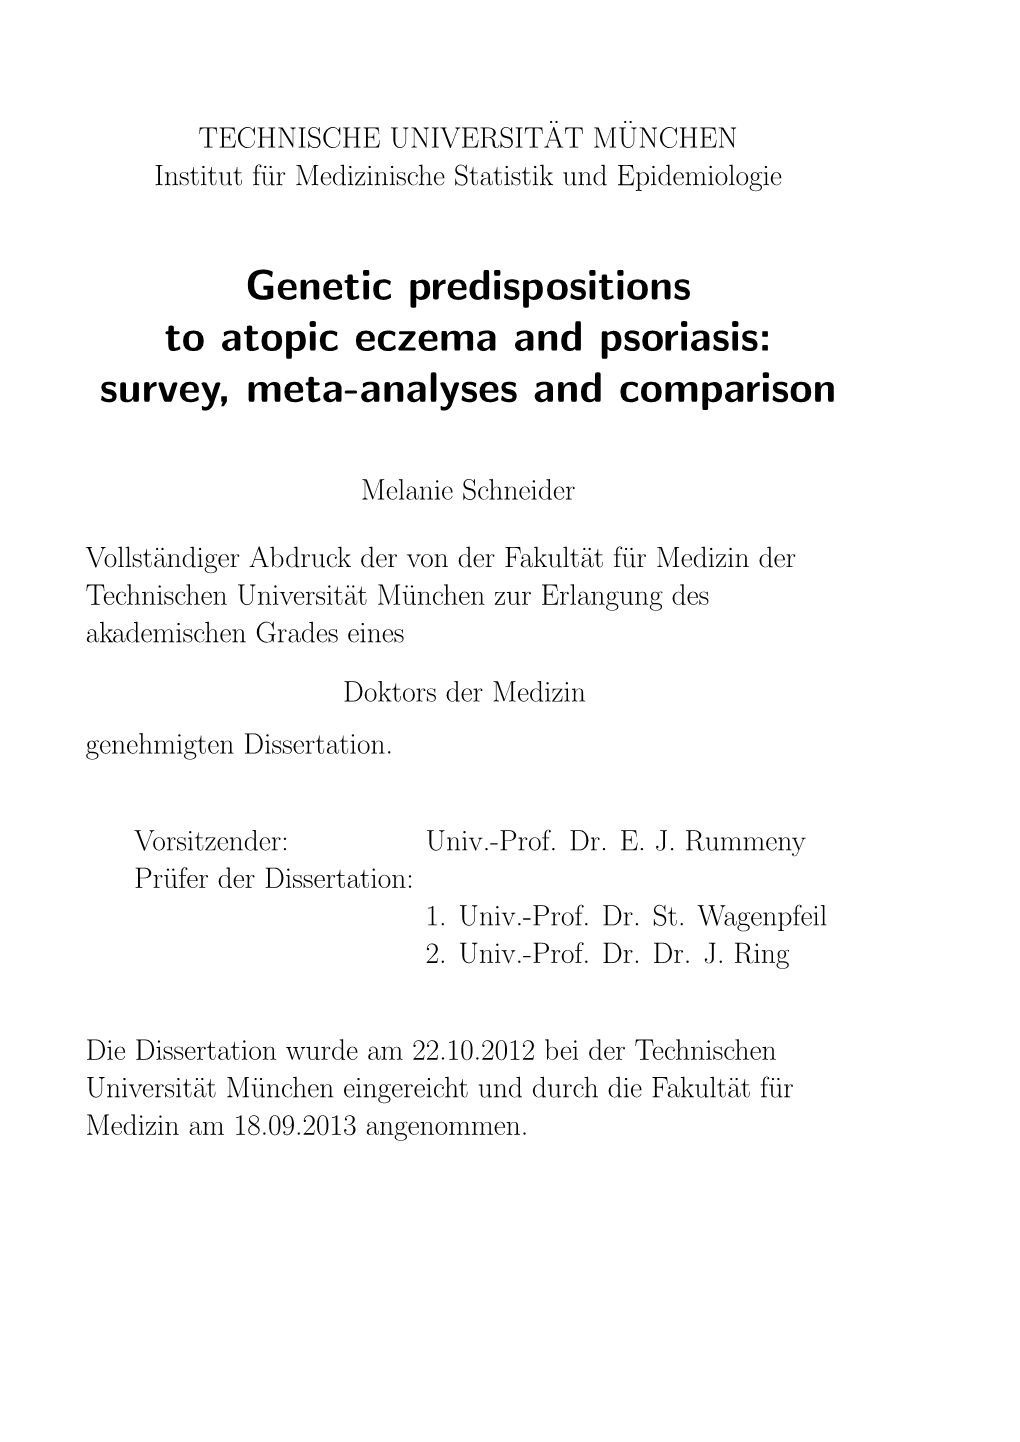 Genetic Predispositions to Atopic Eczema and Psoriasis: Survey, Meta-Analyses and Comparison